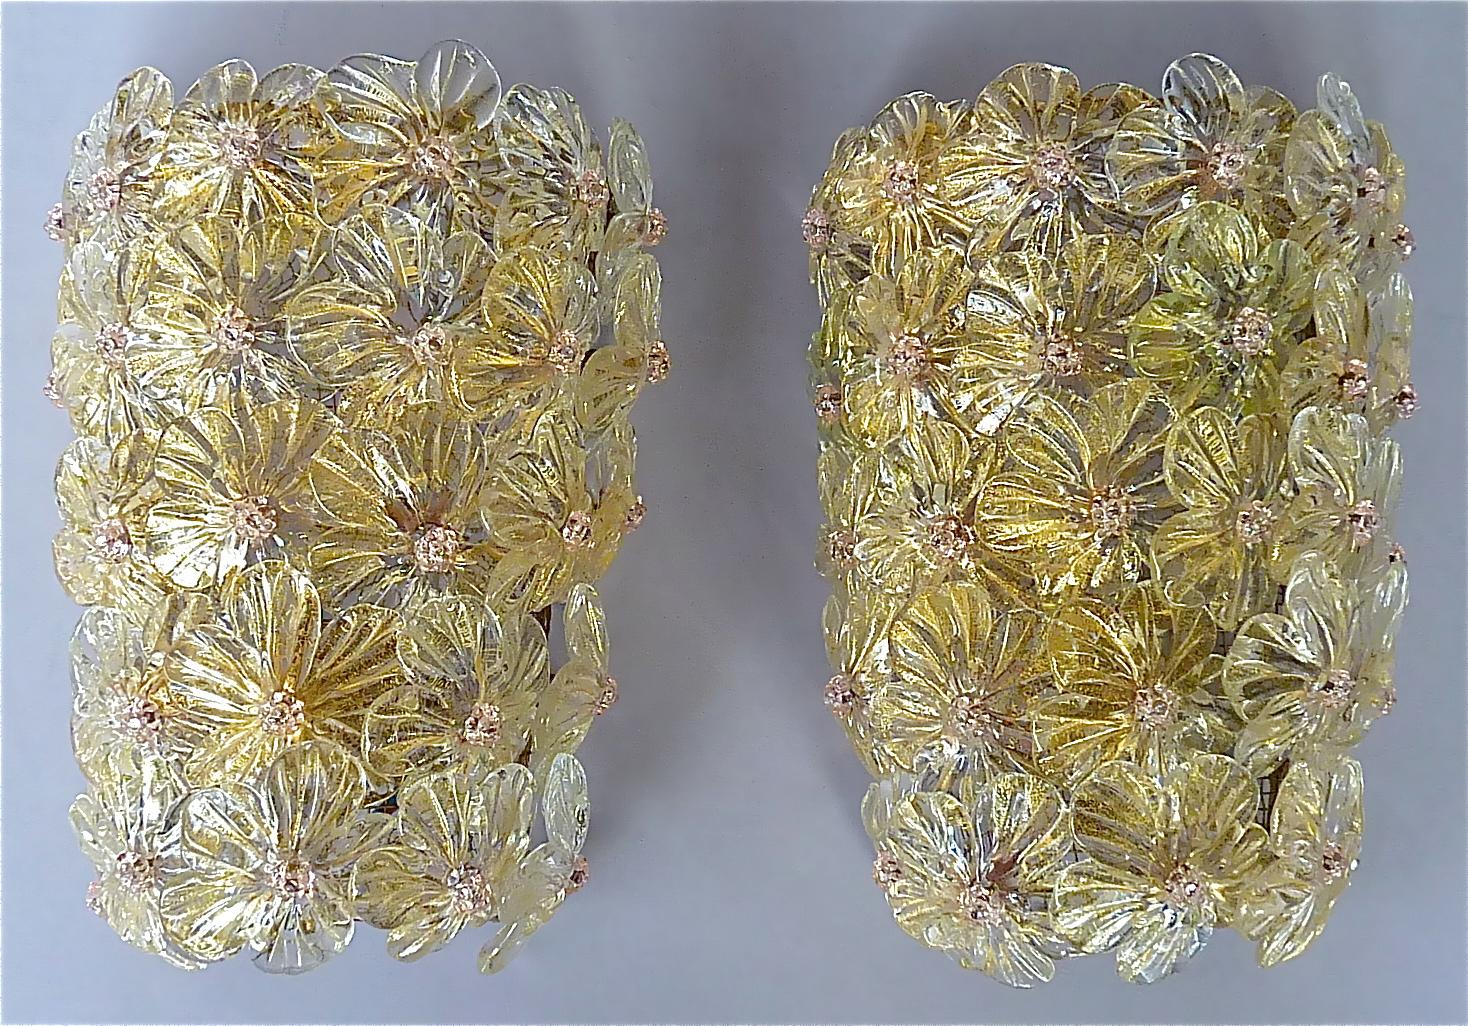 Amazing pair of large Italian Barovier and Toso Murano glass flower bouquet sconces, Italy around 1950s. The beautiful midcentury wall appliques are made of handcrafted Murano glass flowers in clear glass with sparkling 24-carat gold inclusions